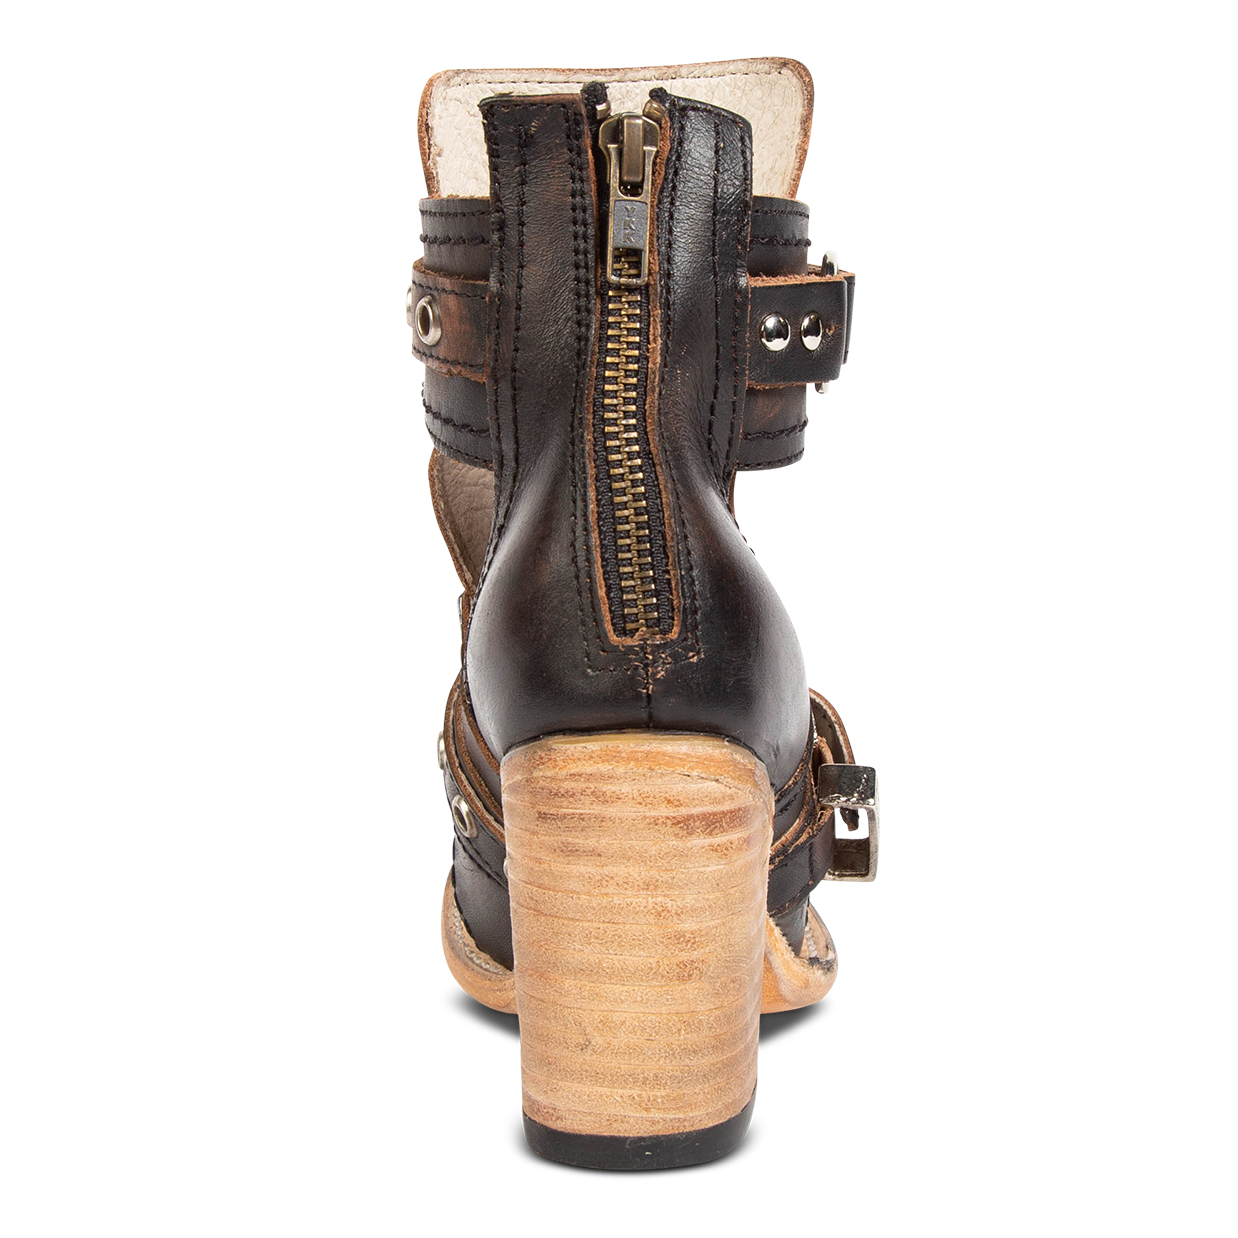 Back view showing working brass zip closure and wood wrapped heel on FREEBIRD women's Sonoma black distressed leather bootie